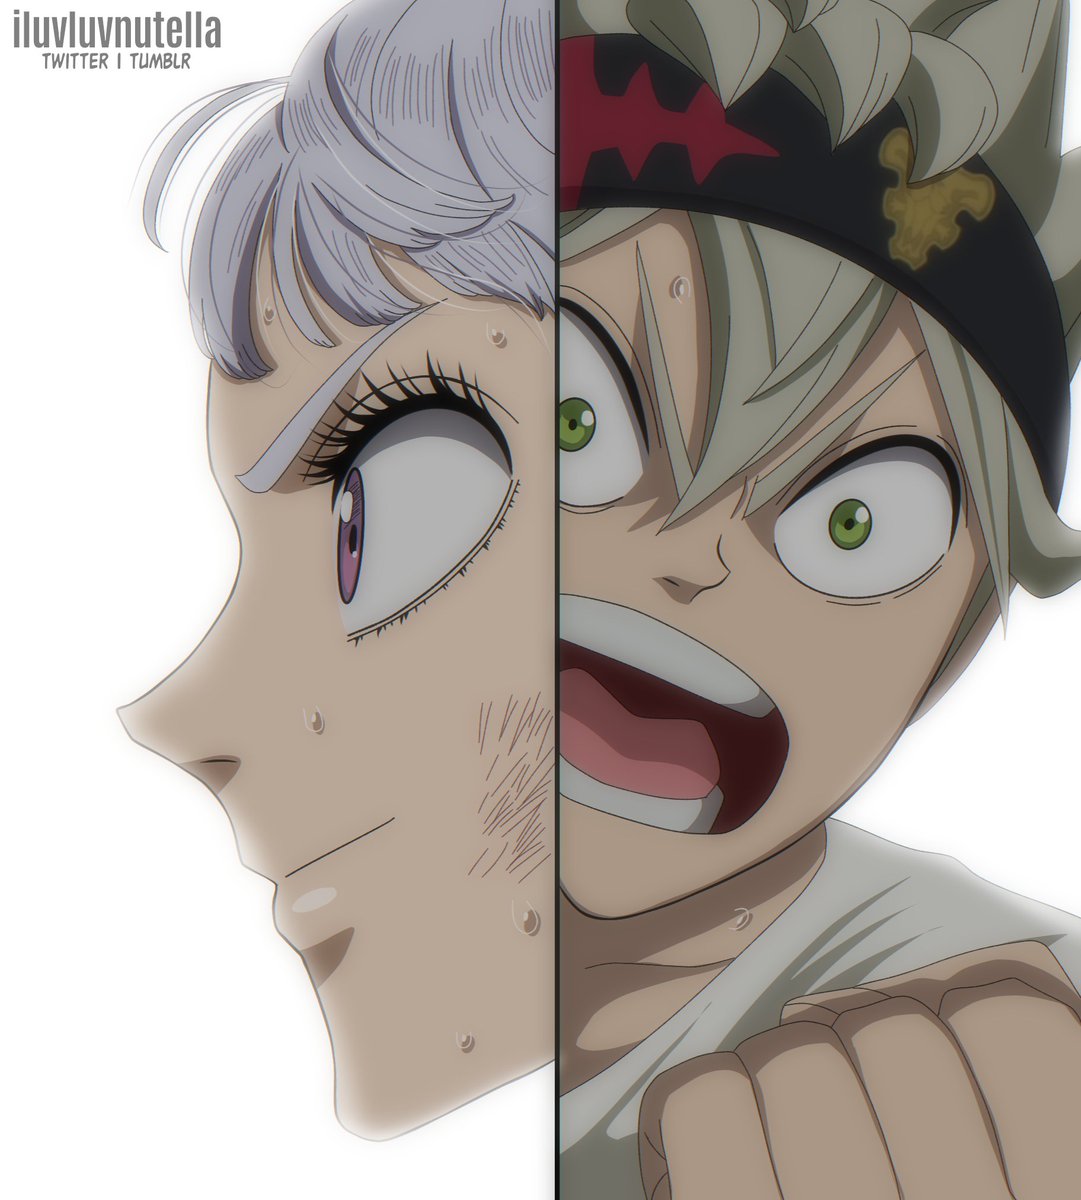 「"I LIKE ASTA." - Noelle
#BCSpoilers 
#my」|d o n n a 🎨🖌coloring comms openのイラスト